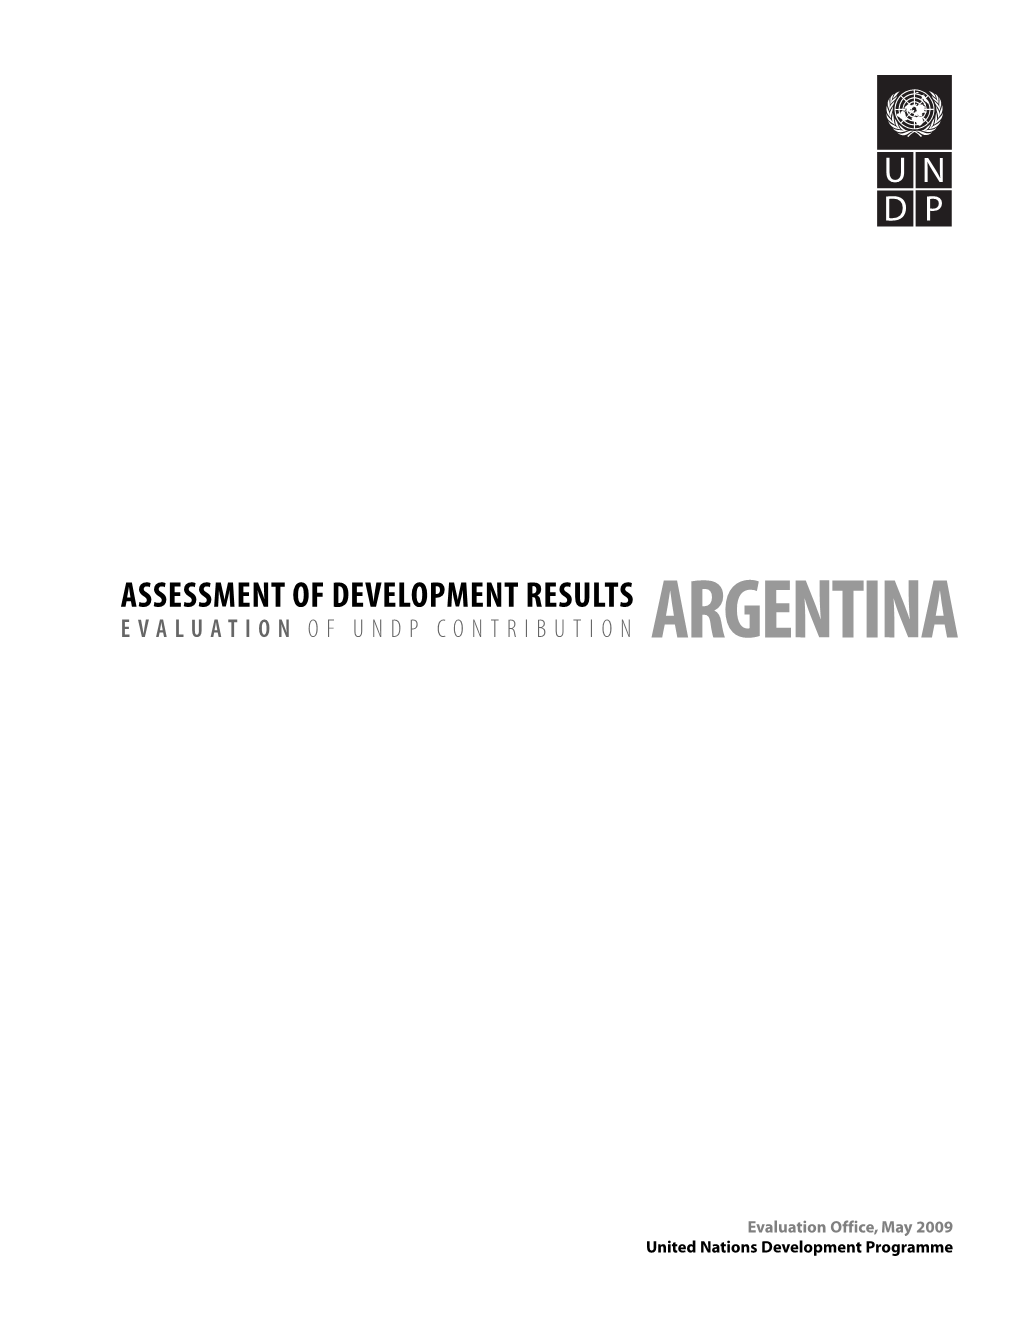 Assessment of Development Results: Evaluation of UNDP Contribution to Argentina